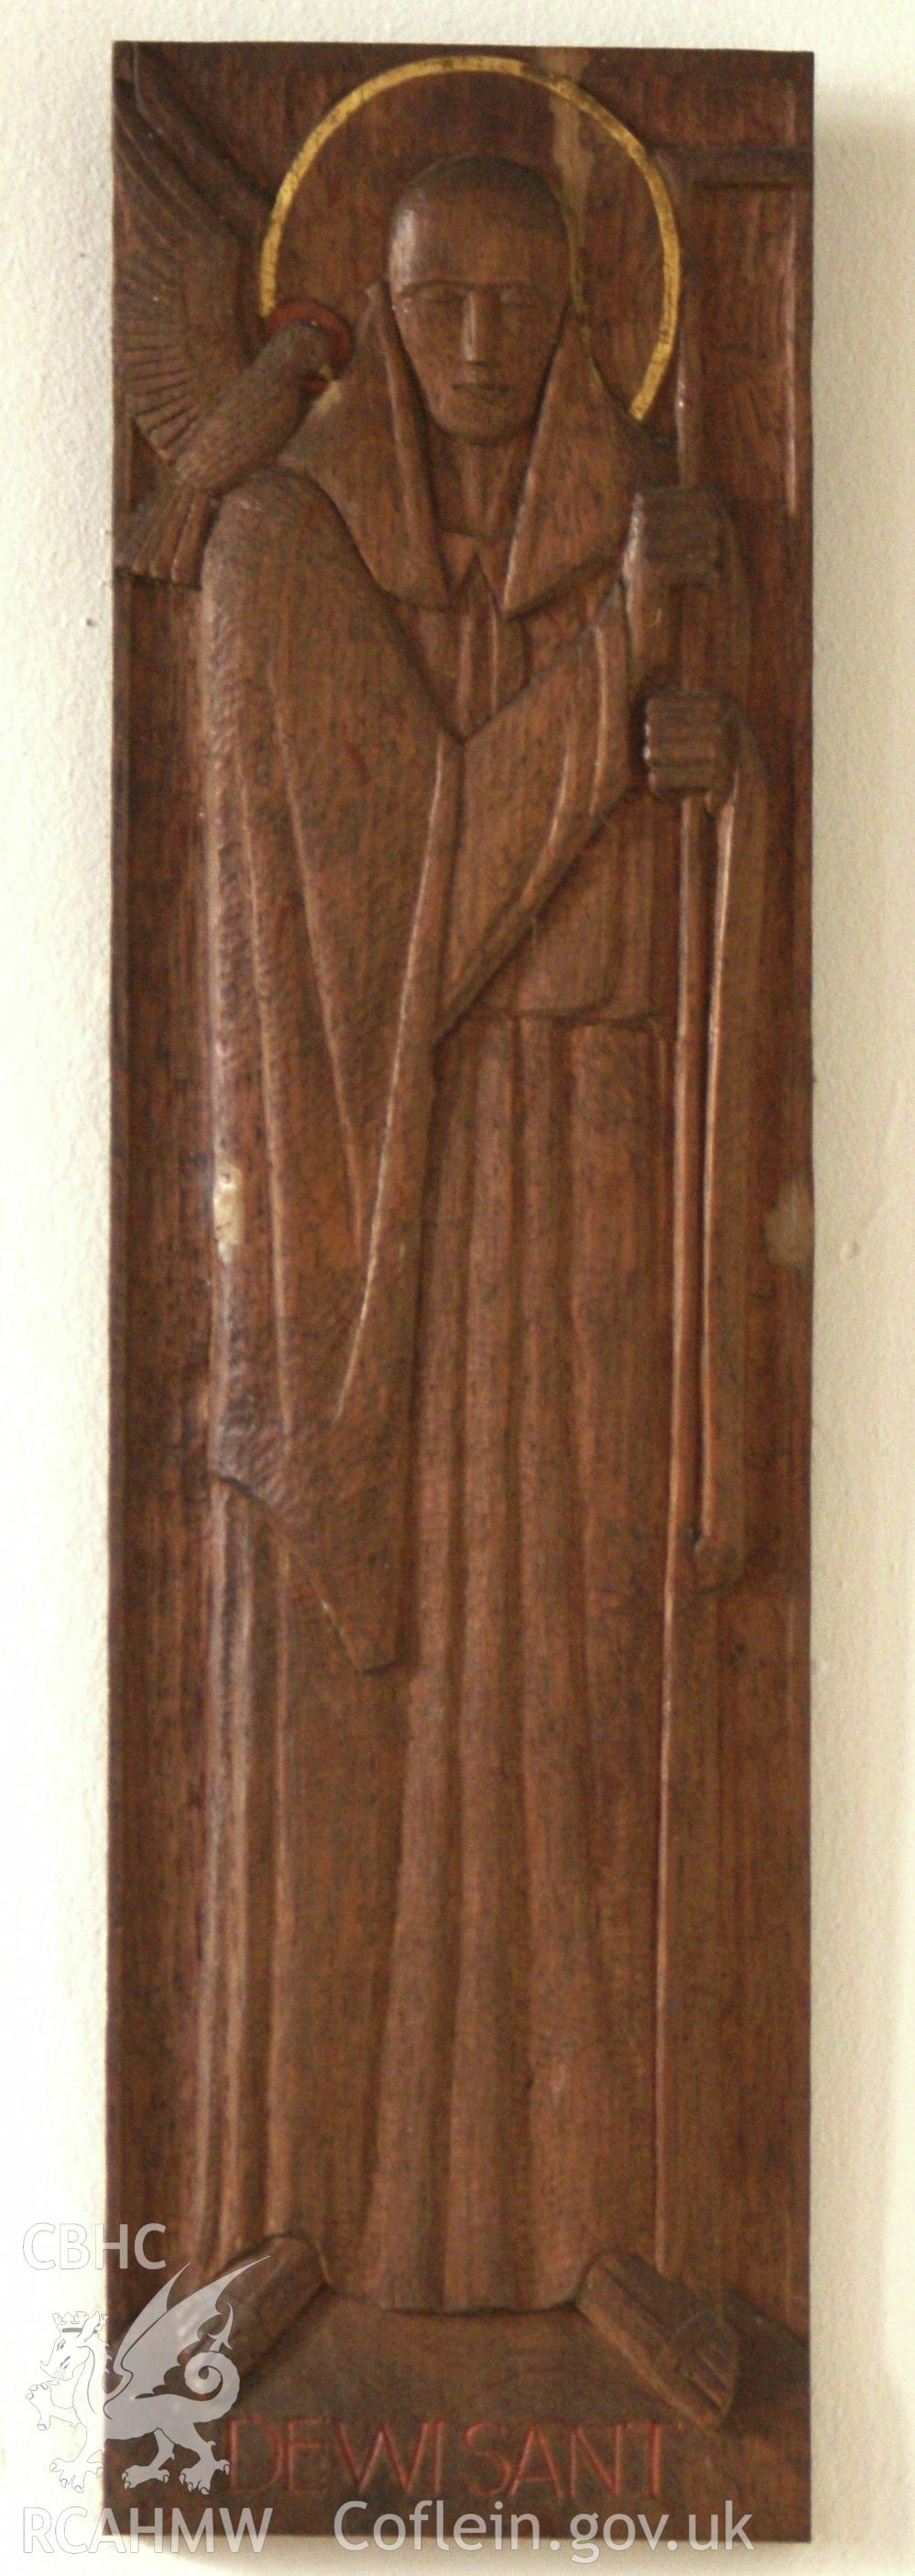 Digital colour photograph showing carved oak relief by Eric Gill depicting St David at St Mary and St Michael Catholic church, Llanarth.